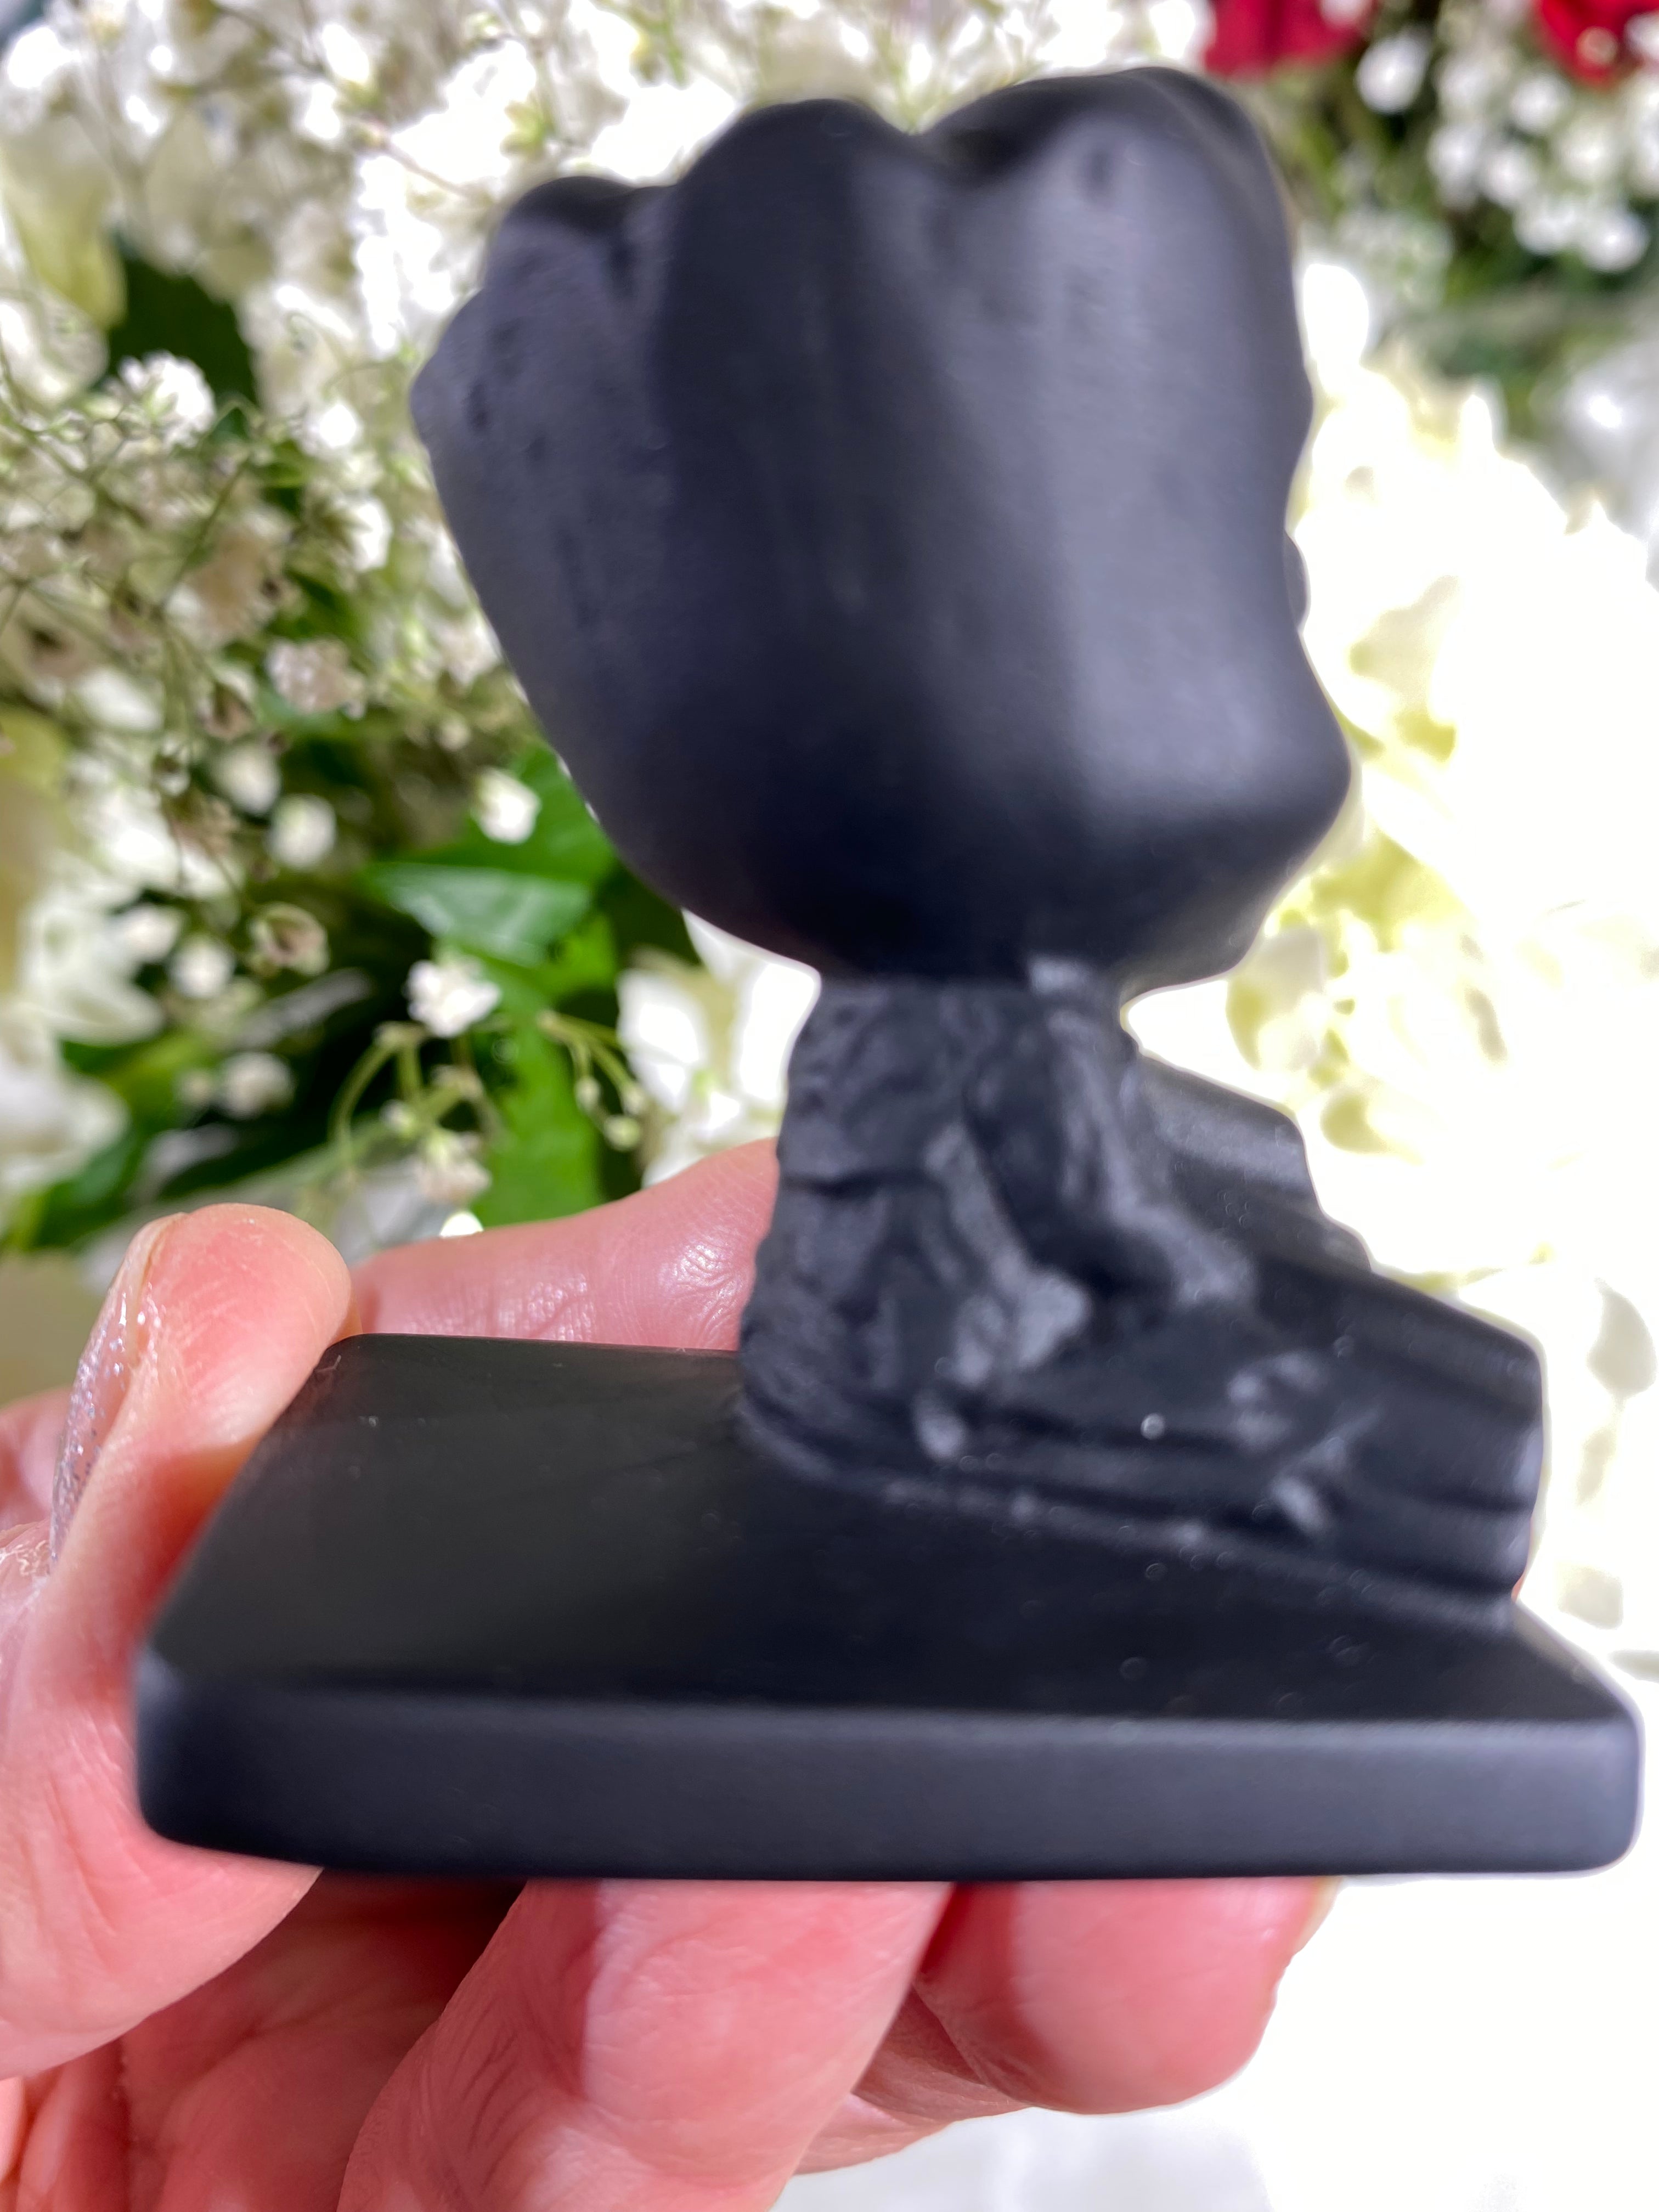 Self-Standing Obsidian Character Carving - Baby Groot